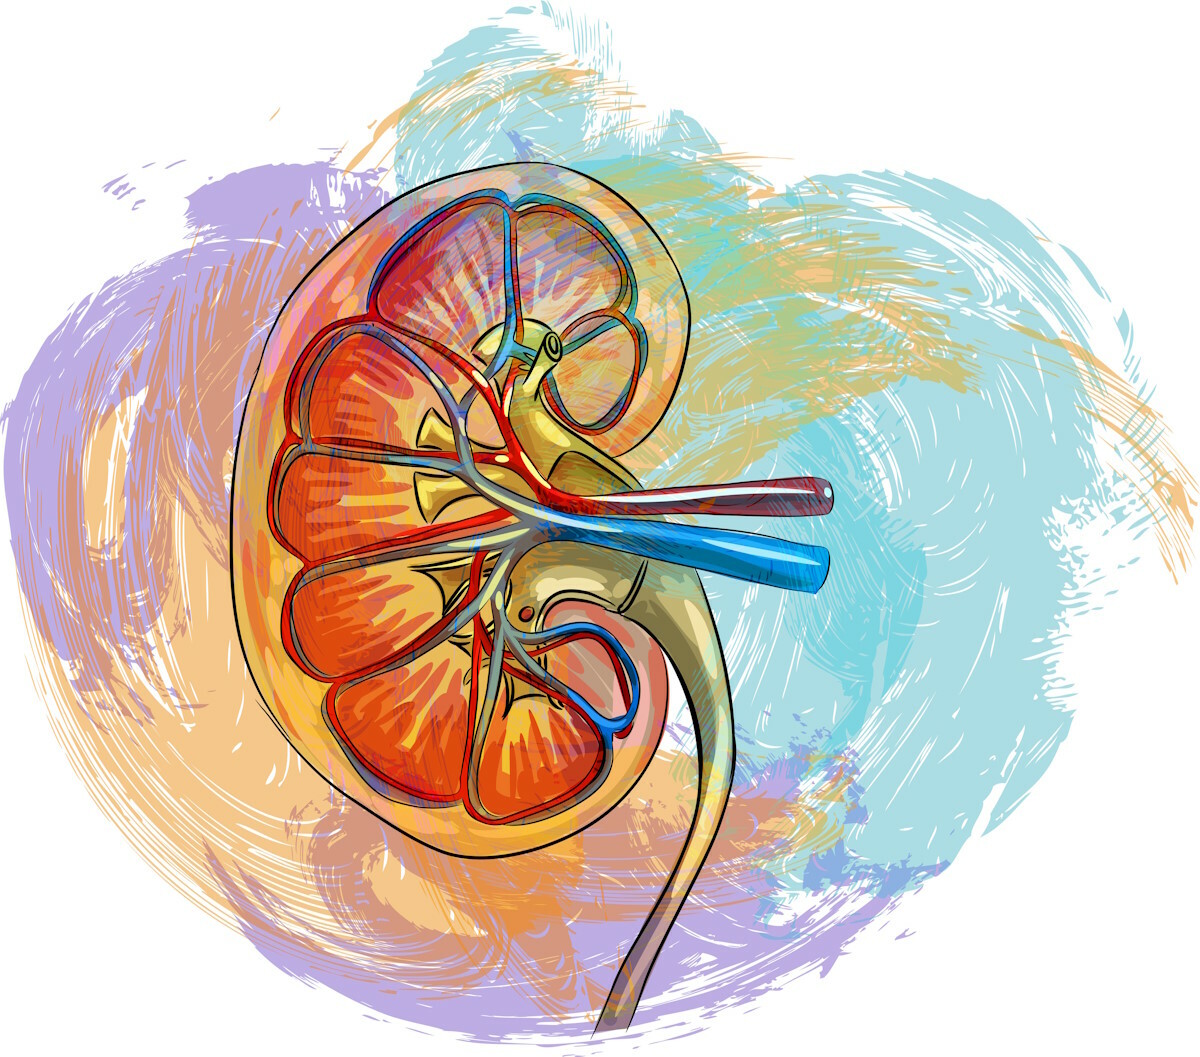 Kidney Canvas - Hot desk your way around the science and art of kidney disease